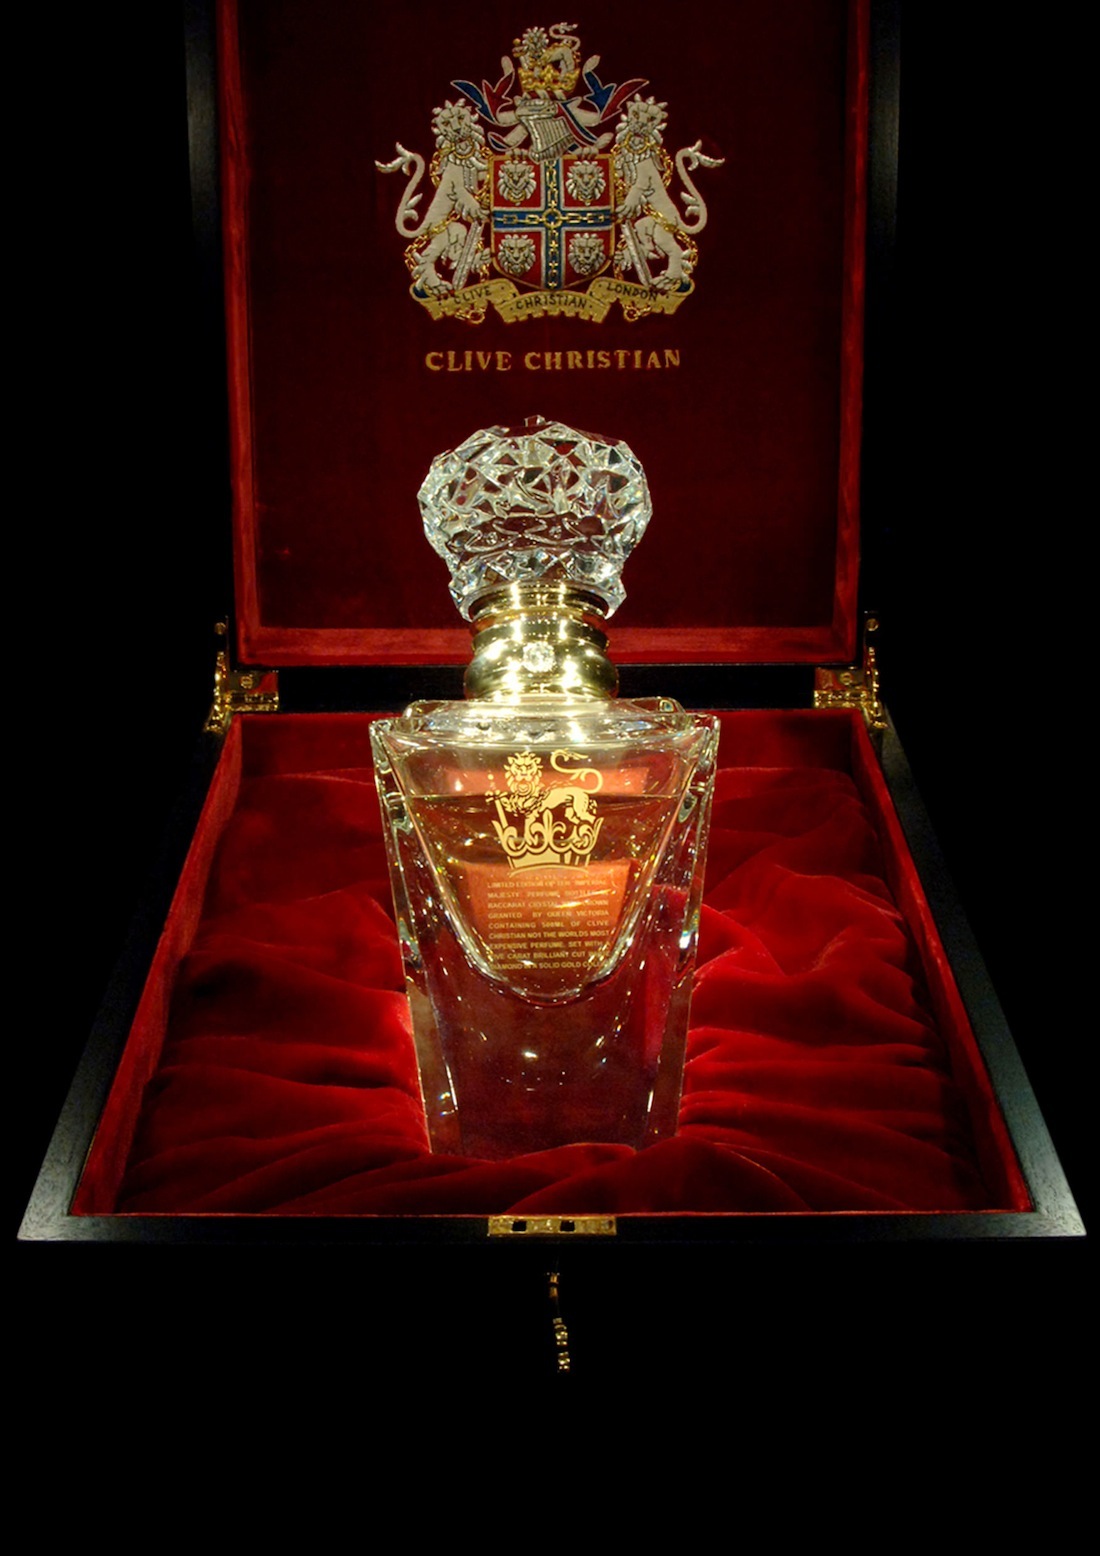 Clive Christian No 1 Perfume Imperial Majesty 